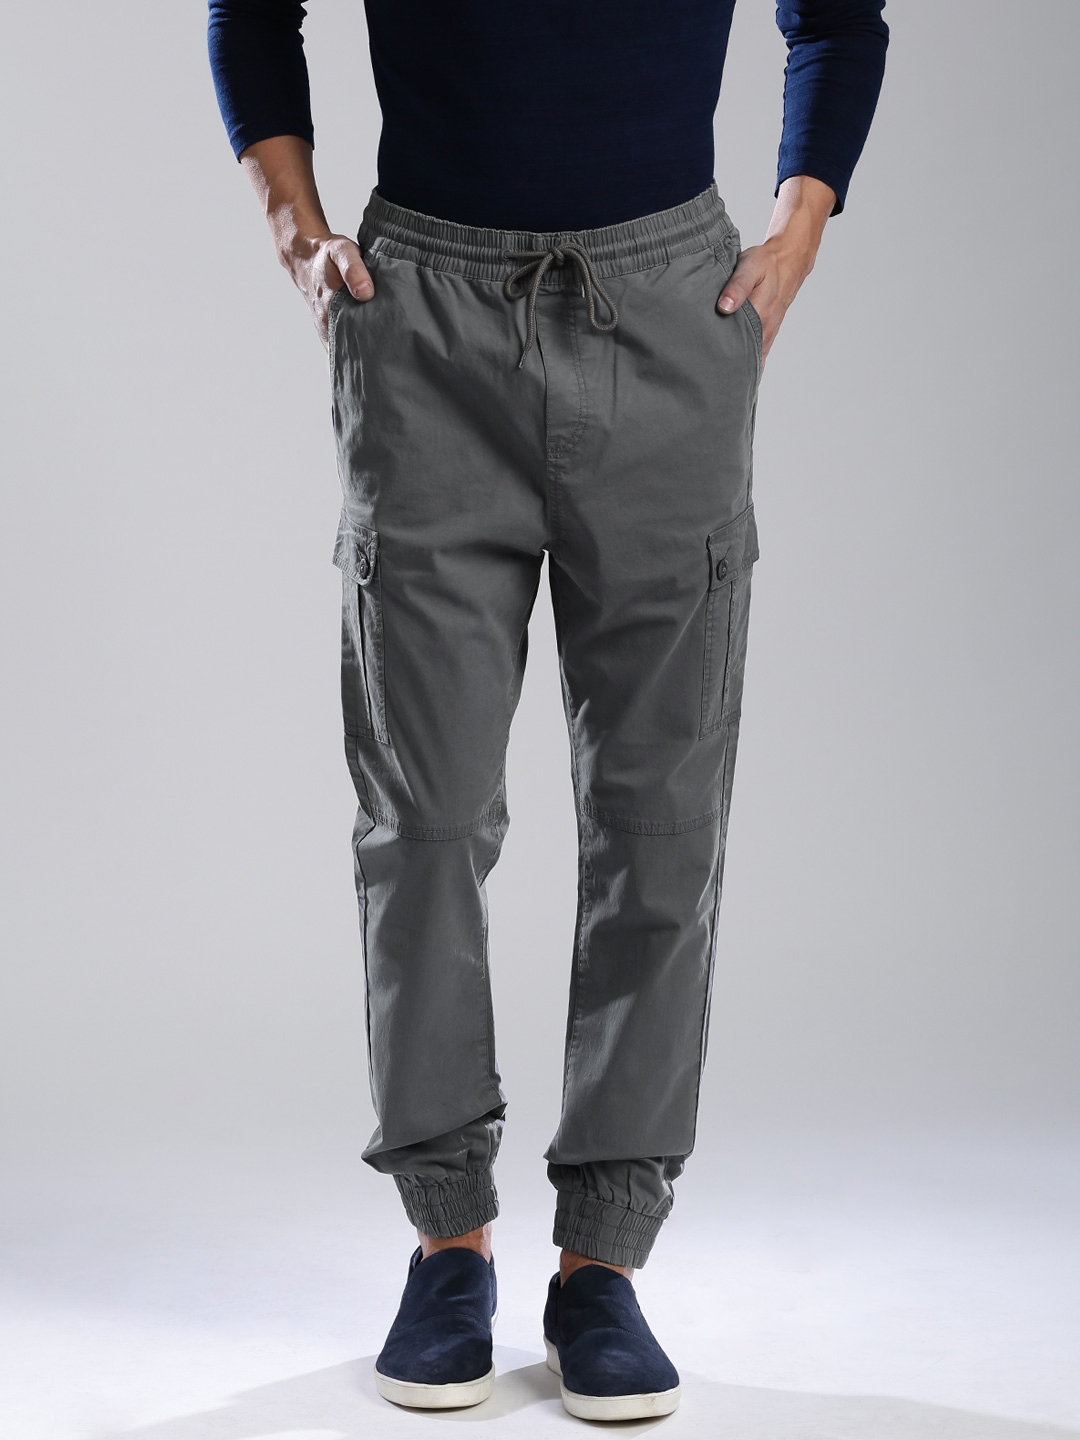 Hrx Trousers  Buy Hrx Trousers online in India